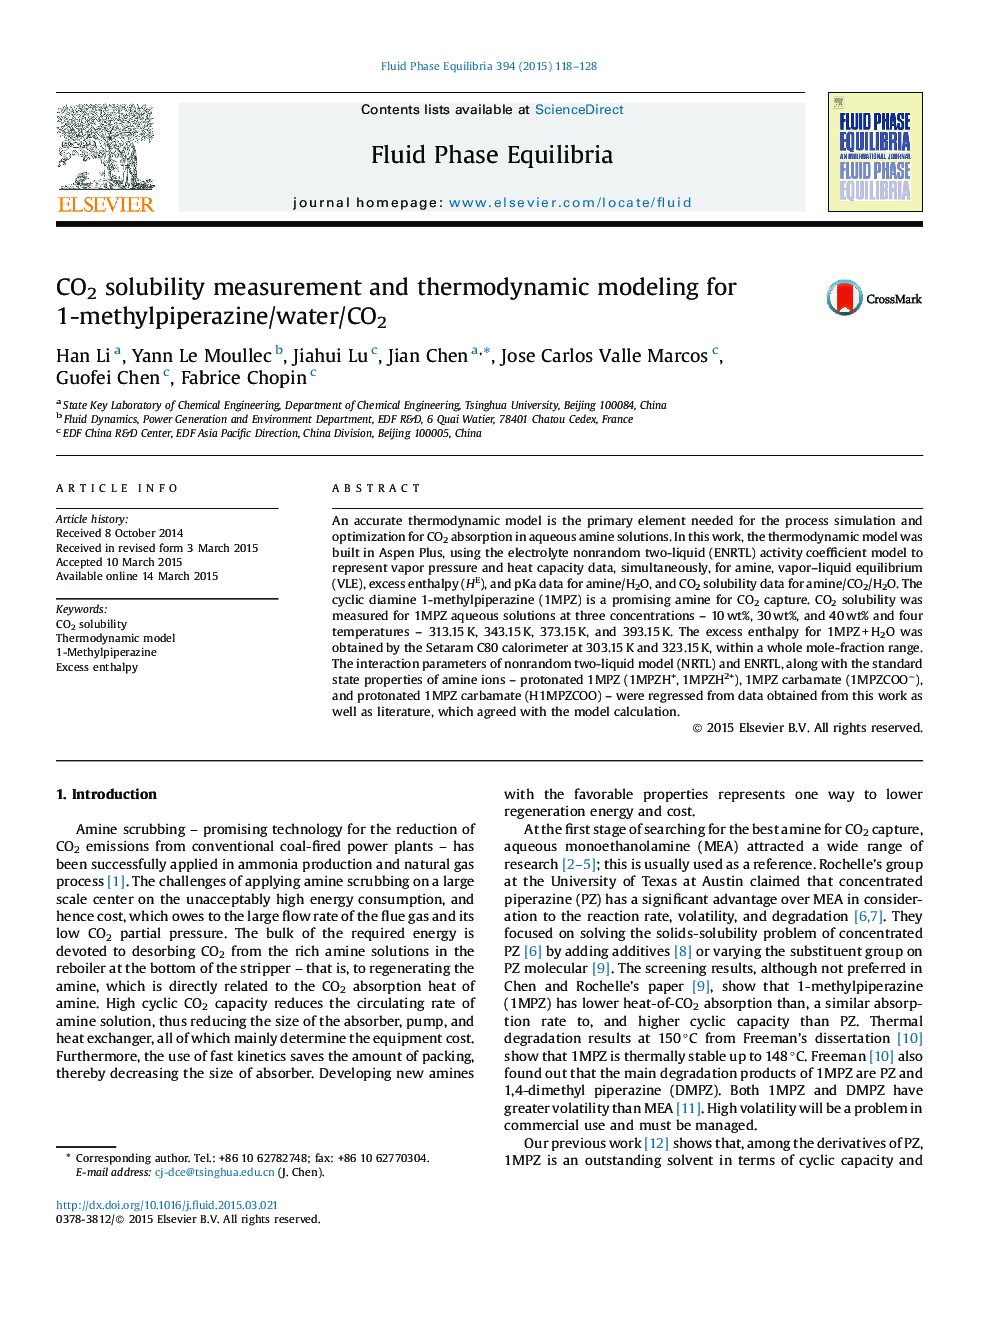 CO2 solubility measurement and thermodynamic modeling for 1-methylpiperazine/water/CO2